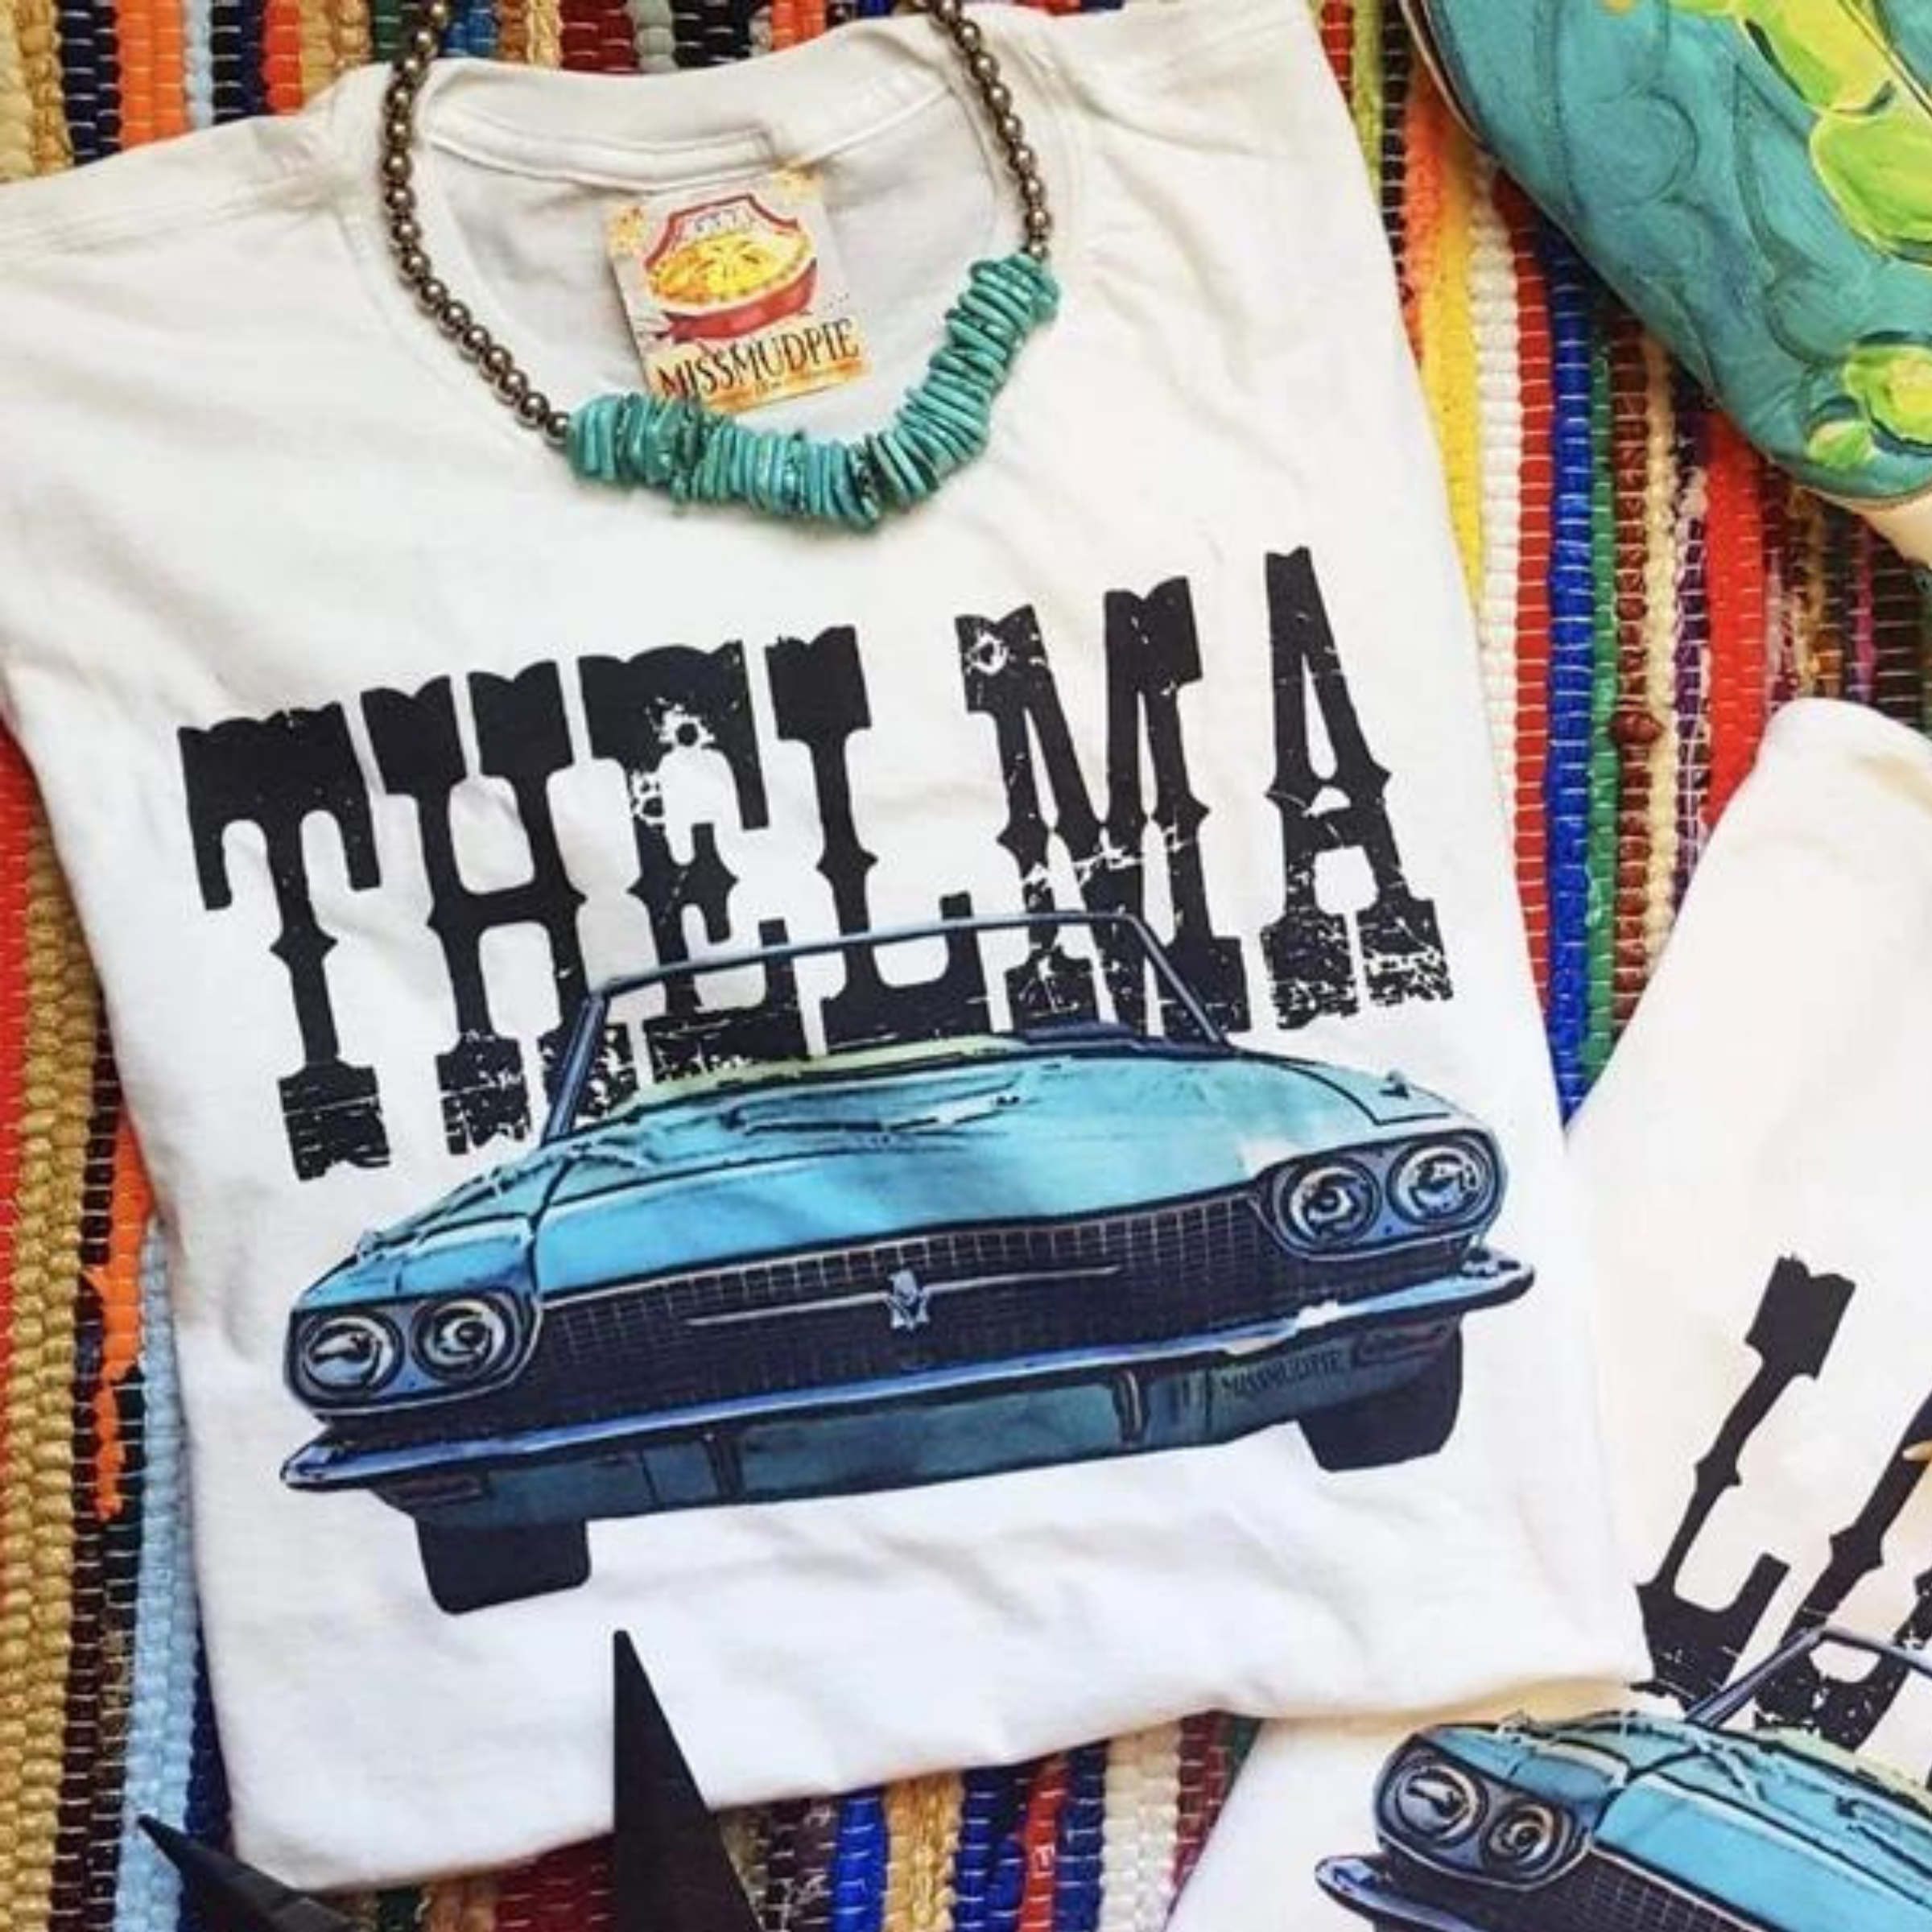 A white tee shirt folded into a rectangle exposing the vintage car graphic that says "Thelma" above. Pictured with a turquoise necklace on a serape rug.